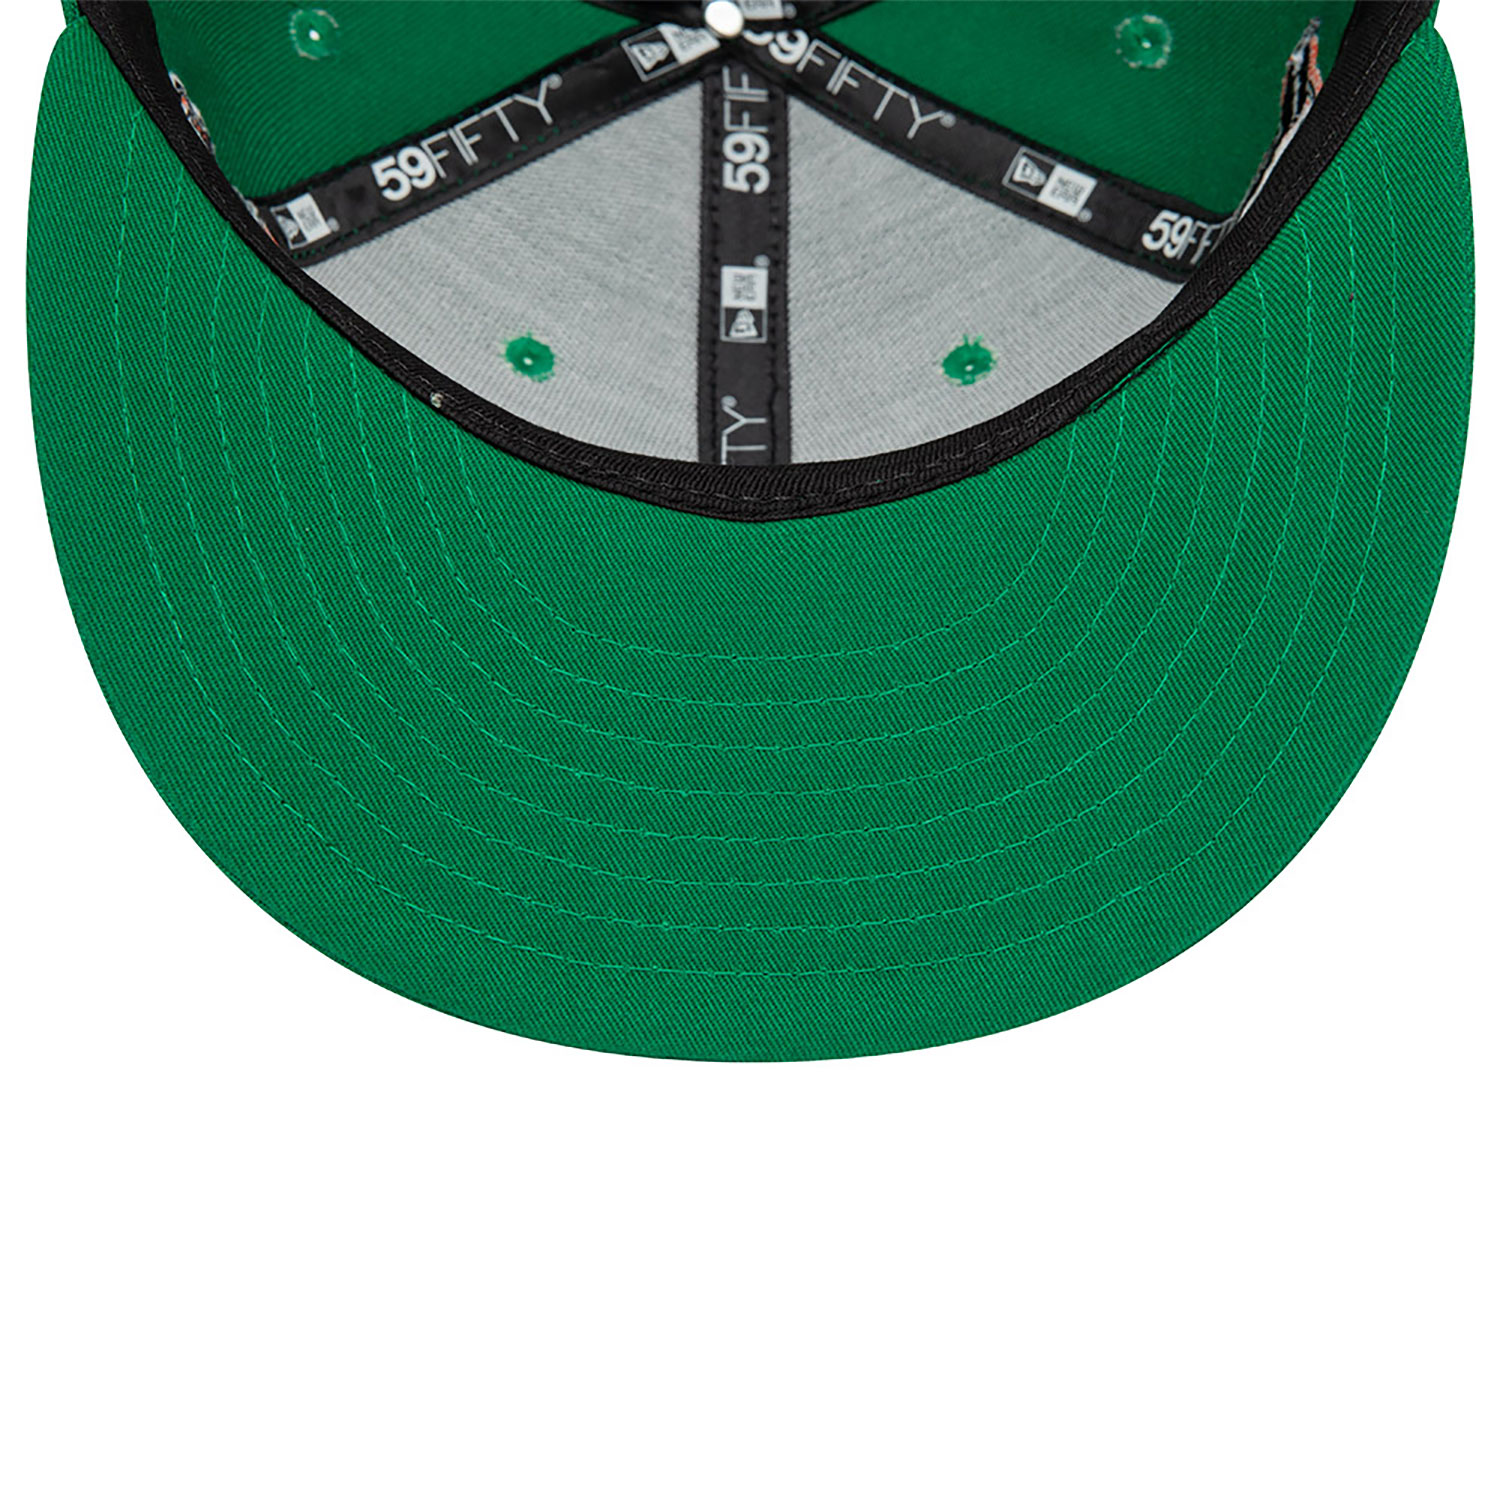 Baltimore Orioles MLB Cooperstown Green 59FIFTY Fitted Cap